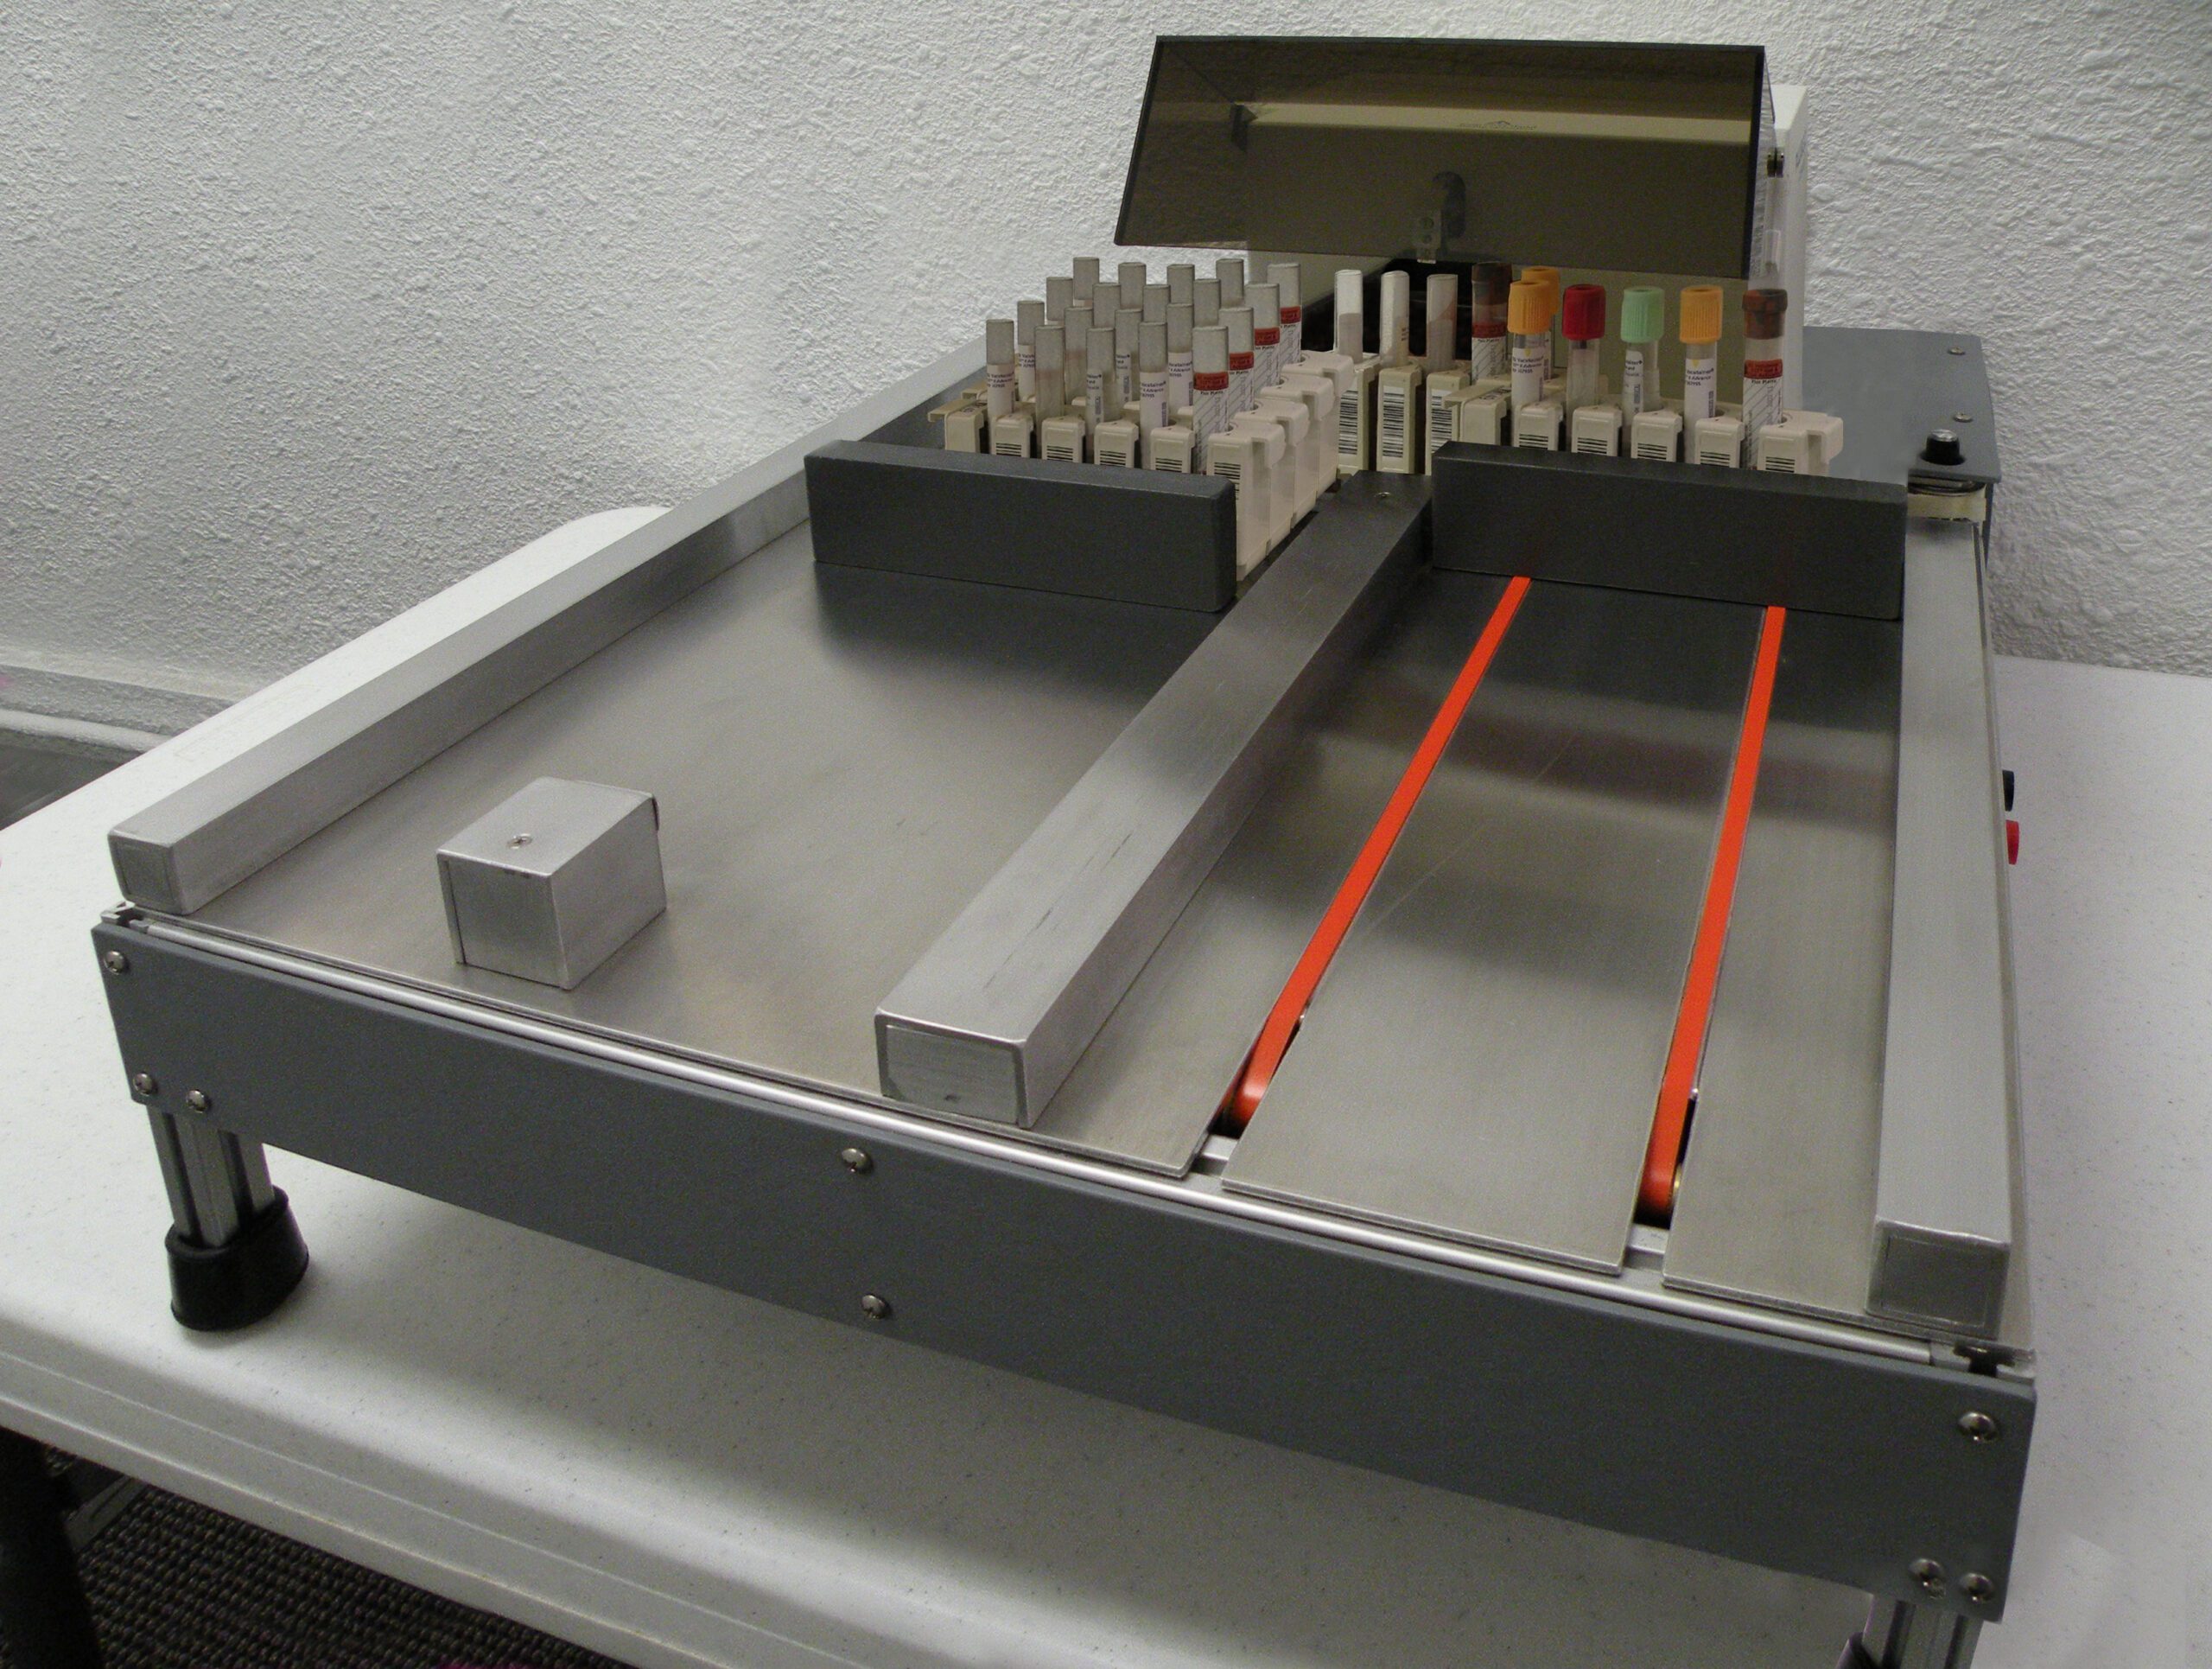 Automated Decapper demonstrating decapping of tubes in an Abbot Architecht Rack